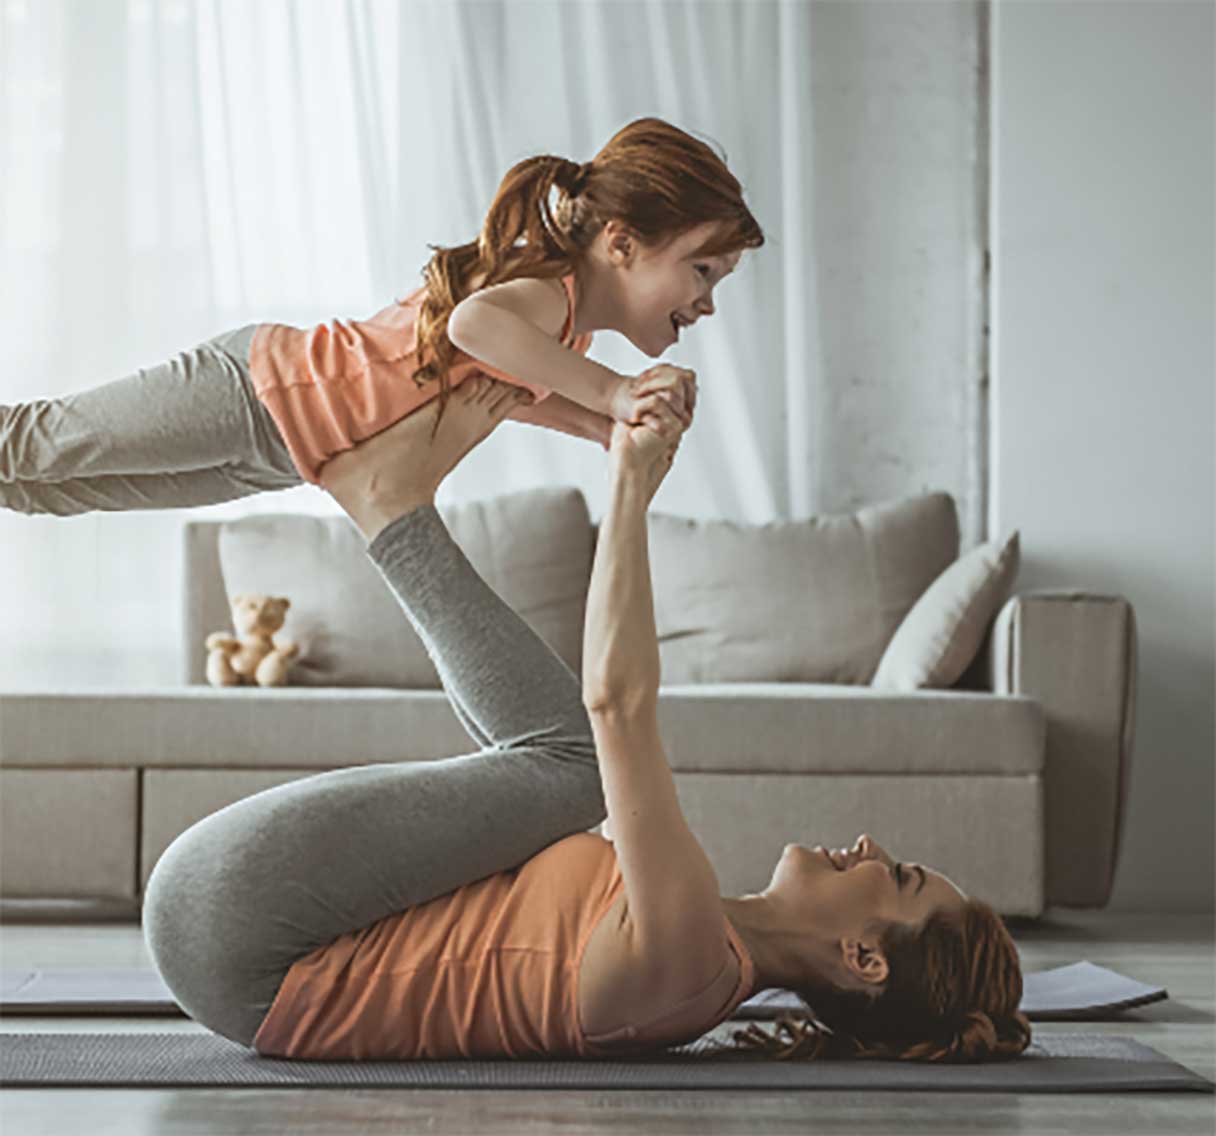 Woman on yoga mat, propping young girl up on her feet